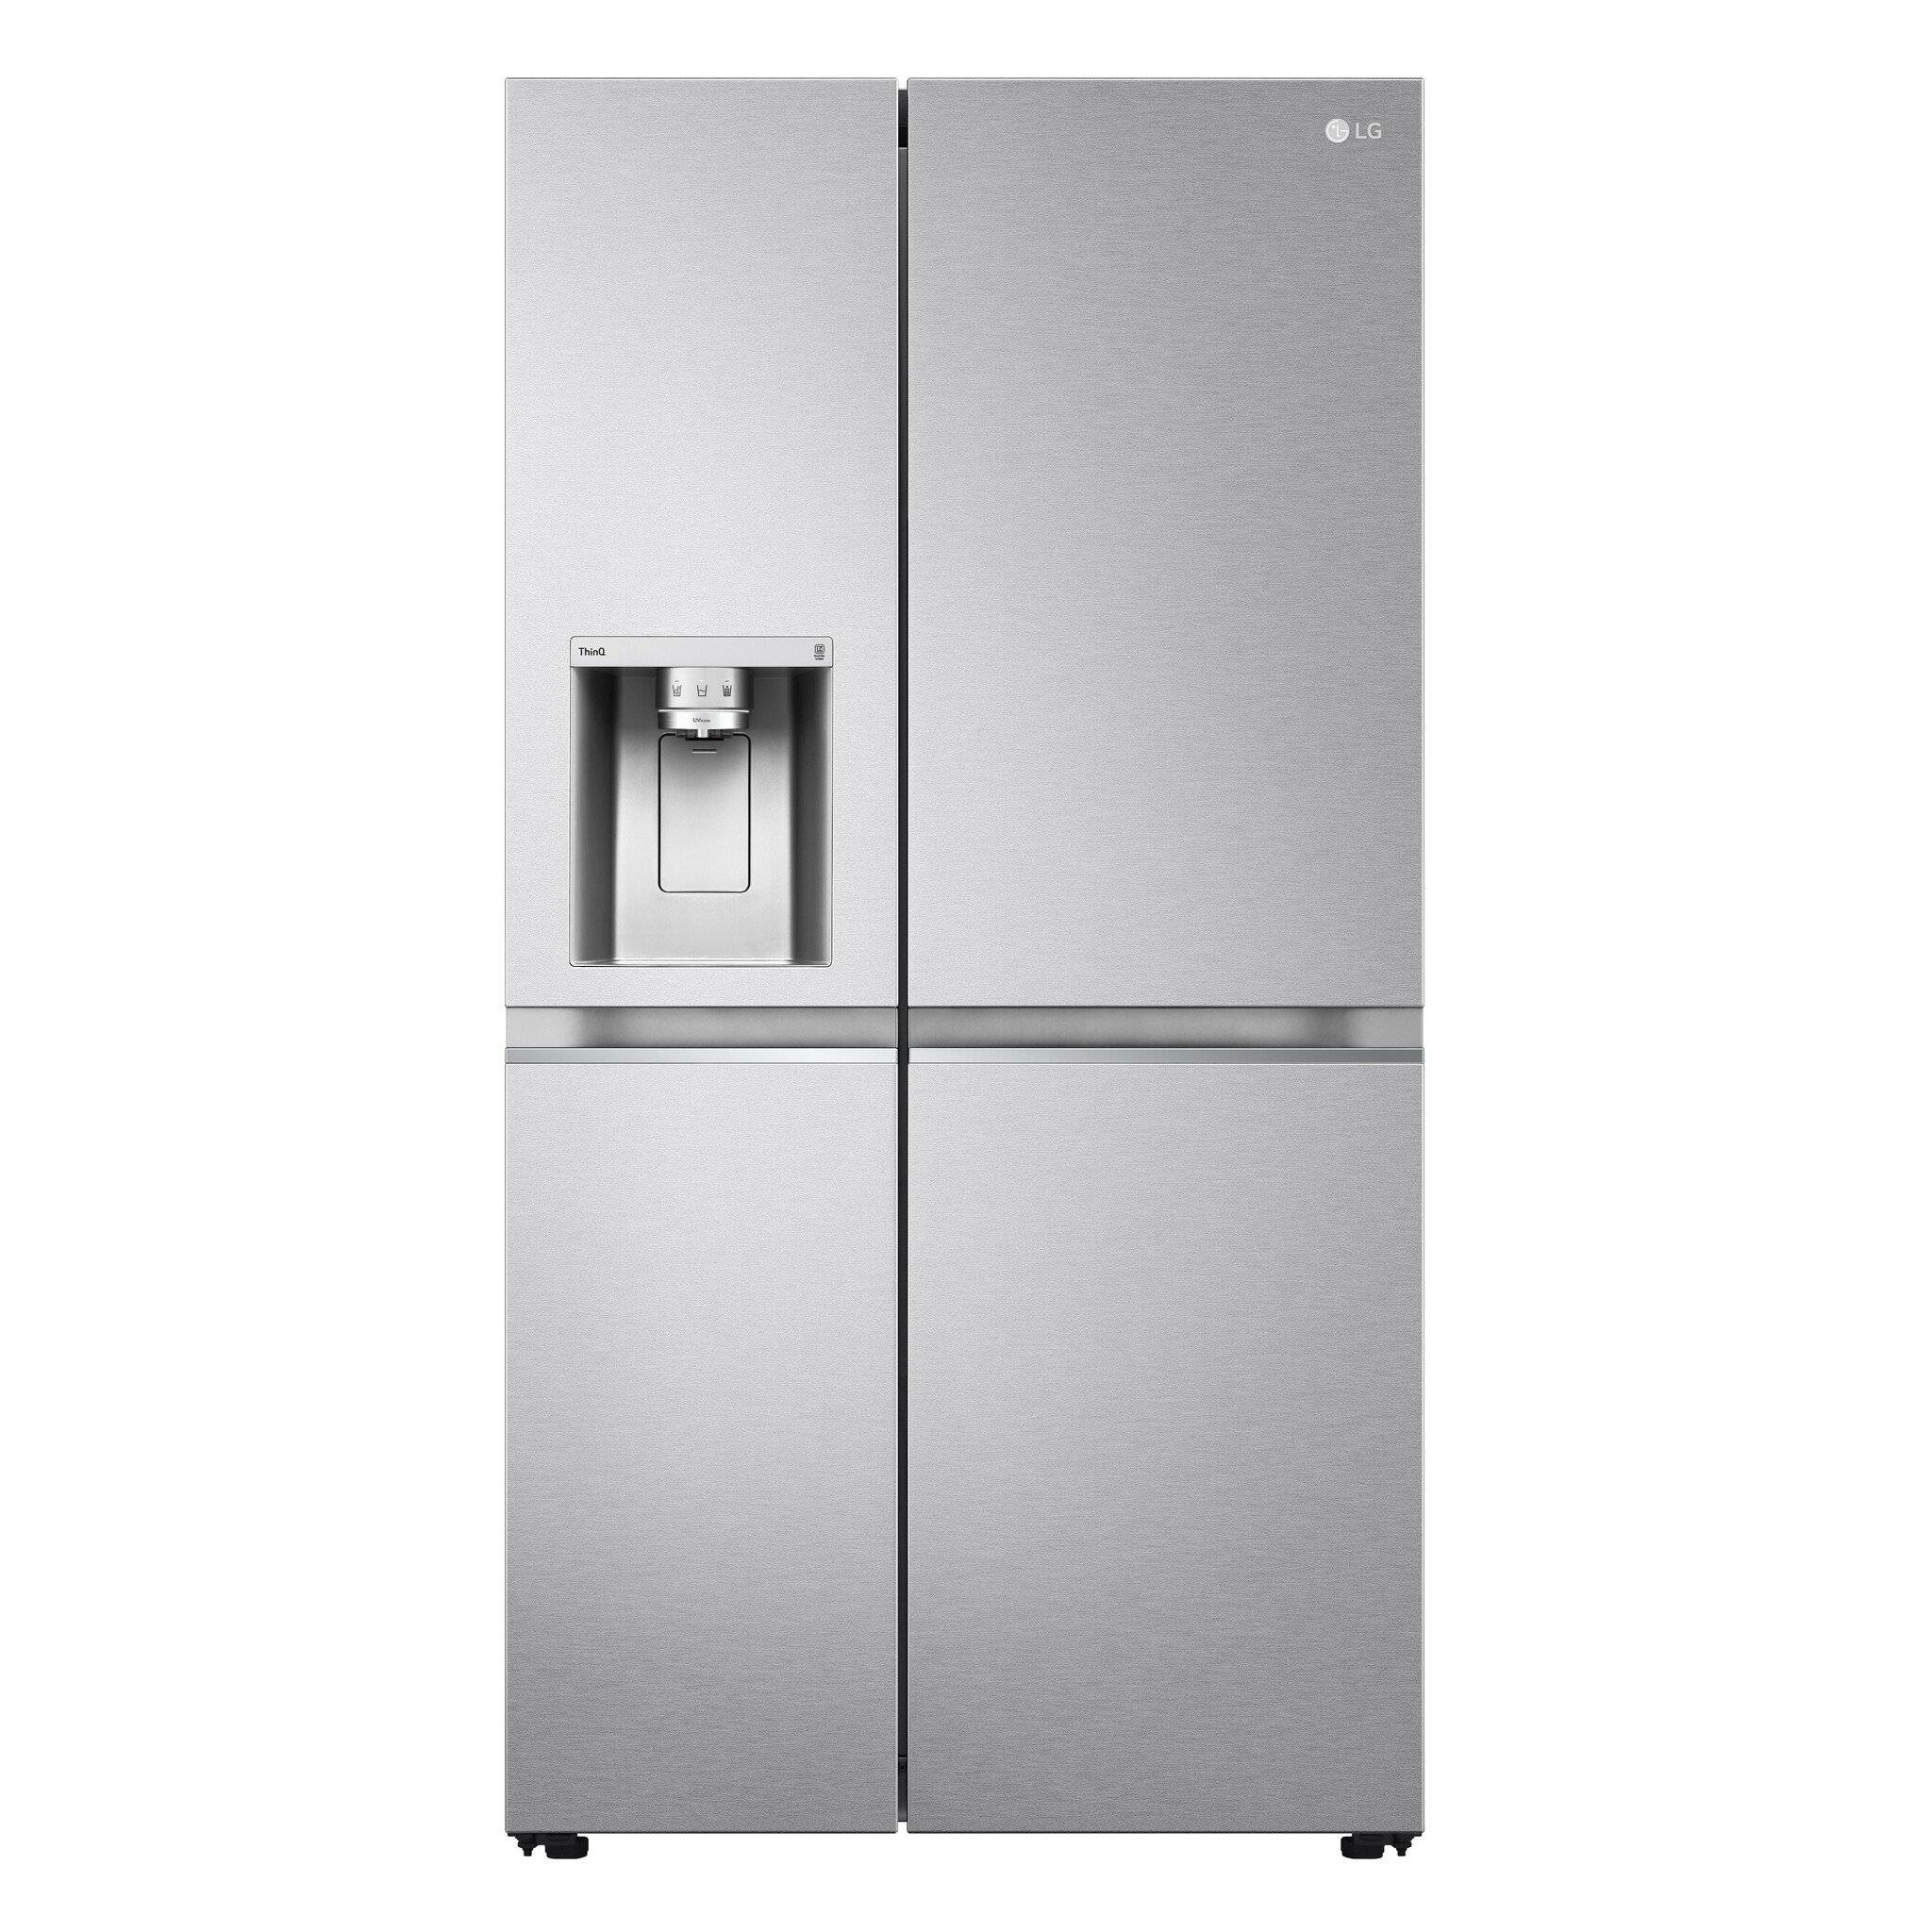 LG UVnano™ GSLV91MBAC Wifi Connected Non-Plumbed Frost Free American Fridge Freezer – Metal Sorbet – C Rated #365925